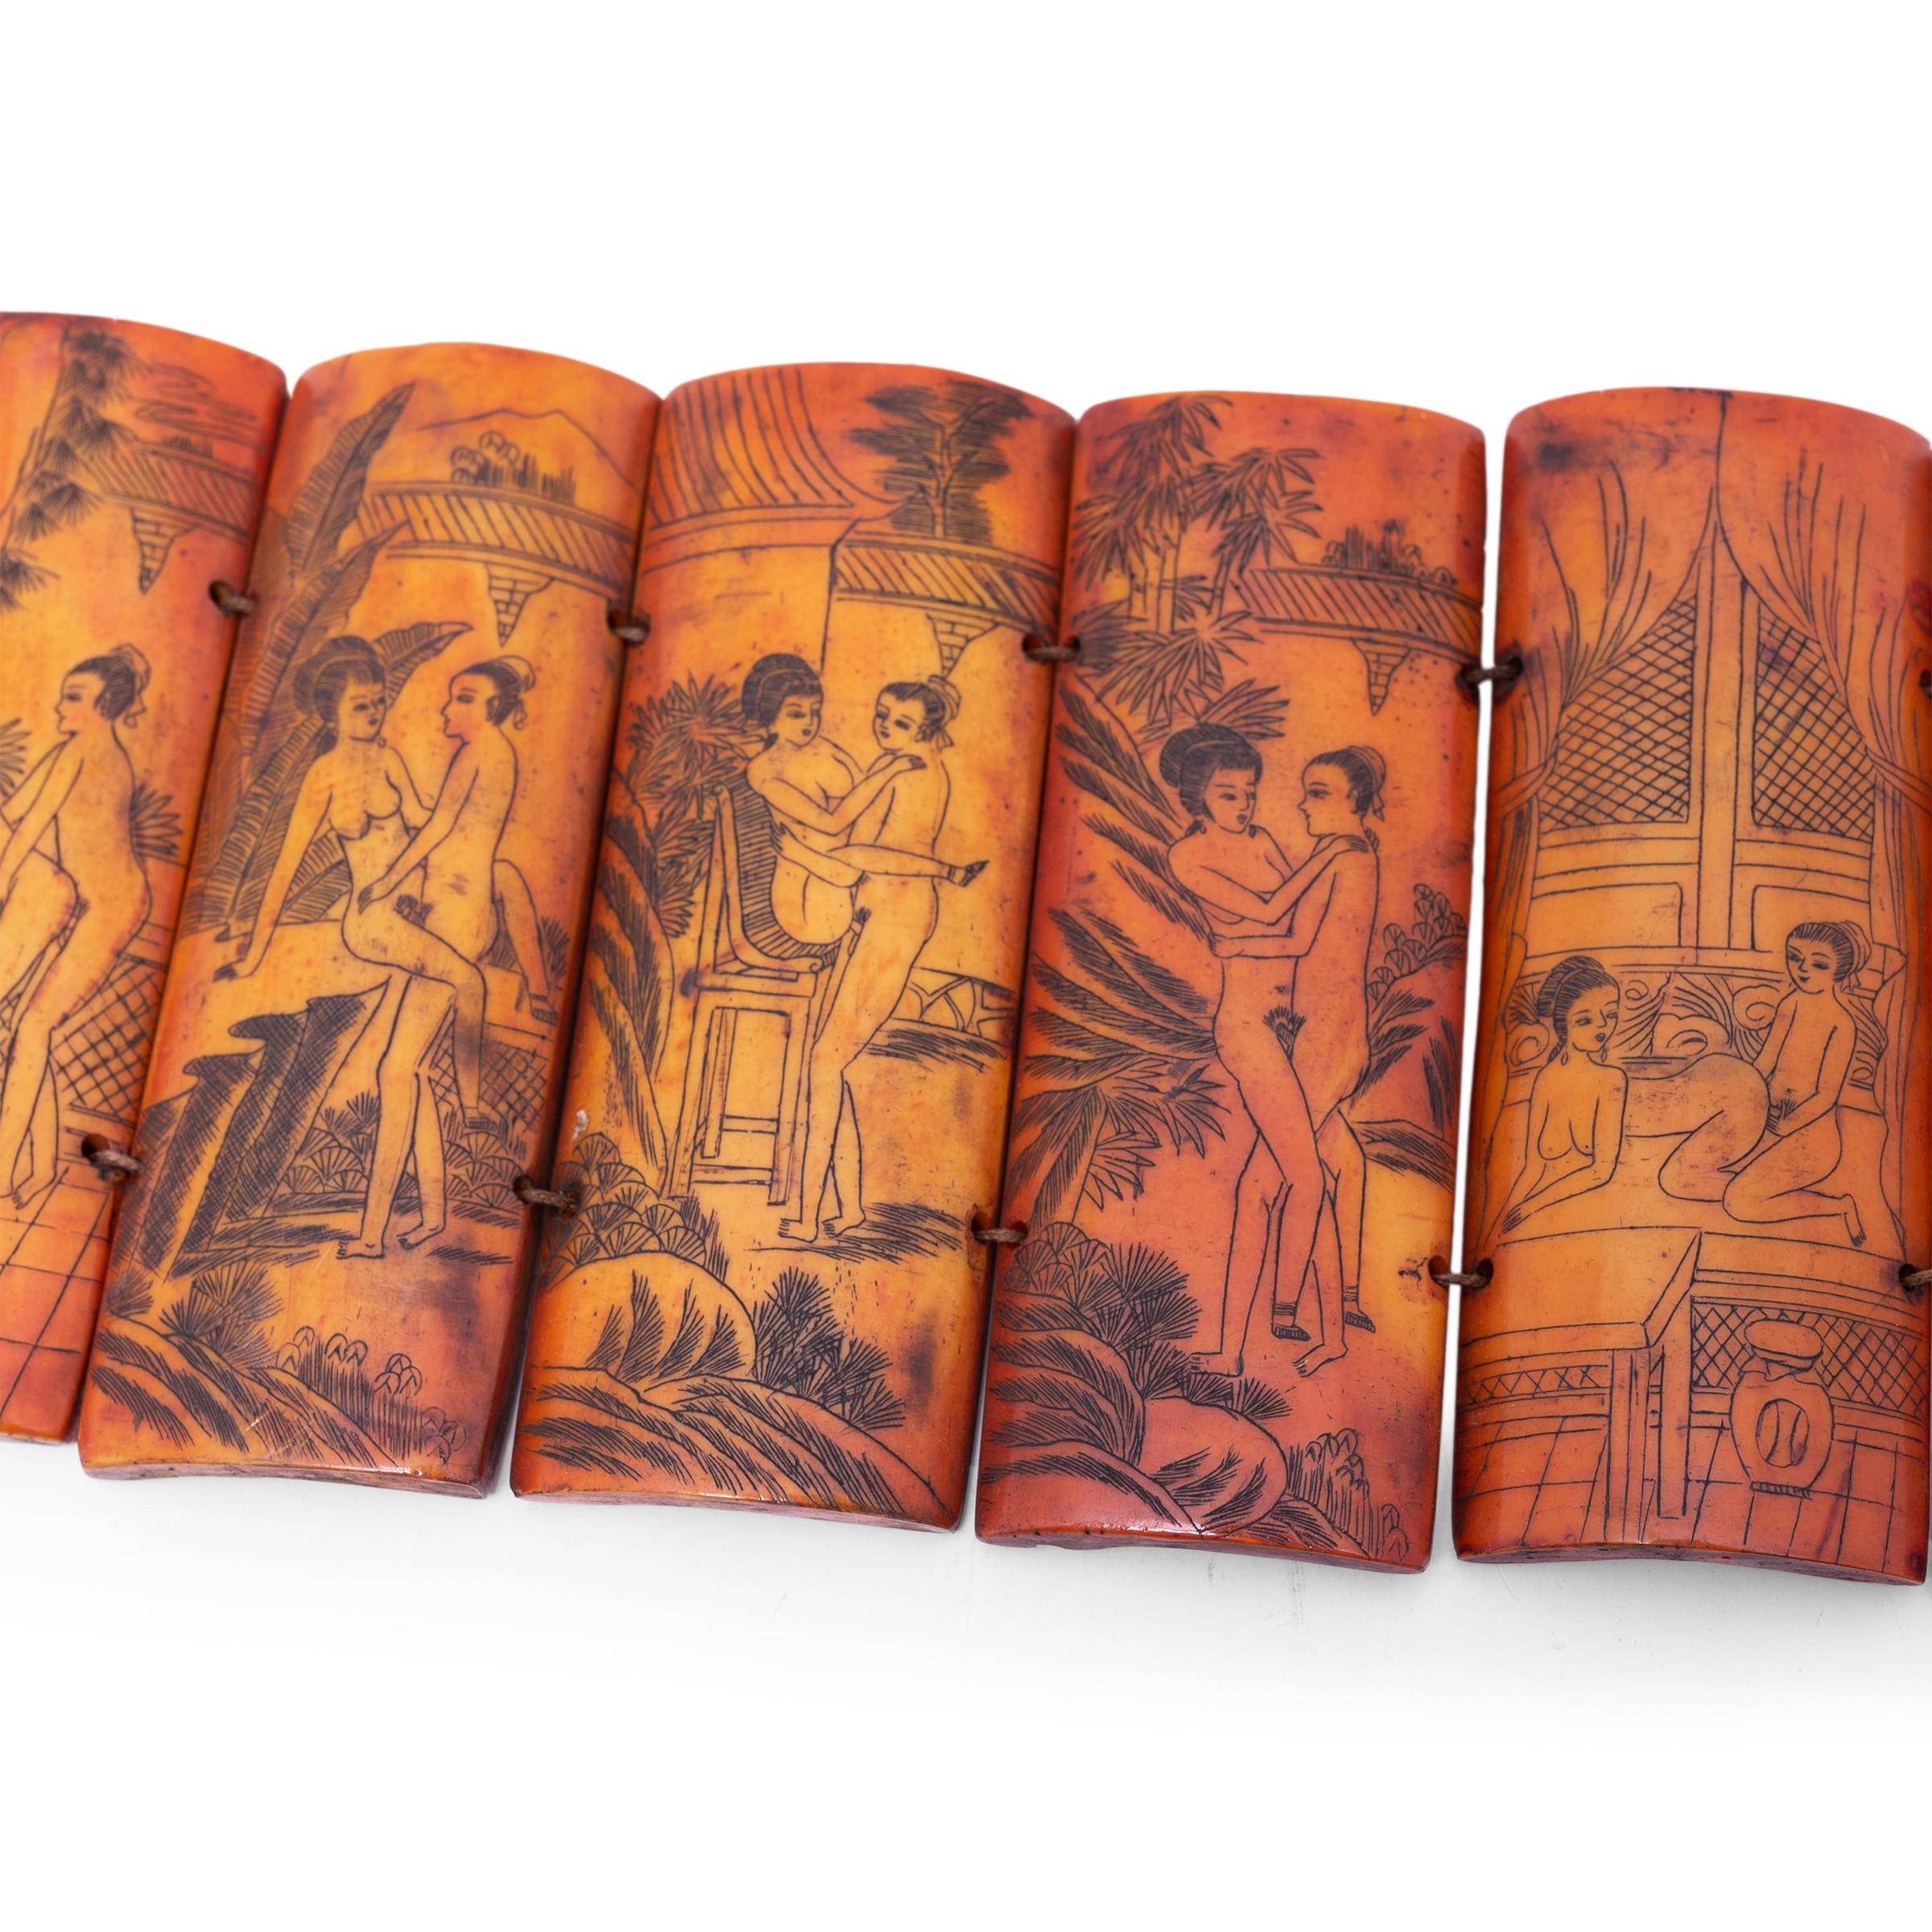 Set of Ten Erotic Chinese Bone Etchings, circa 1900 In Good Condition For Sale In Chicago, IL